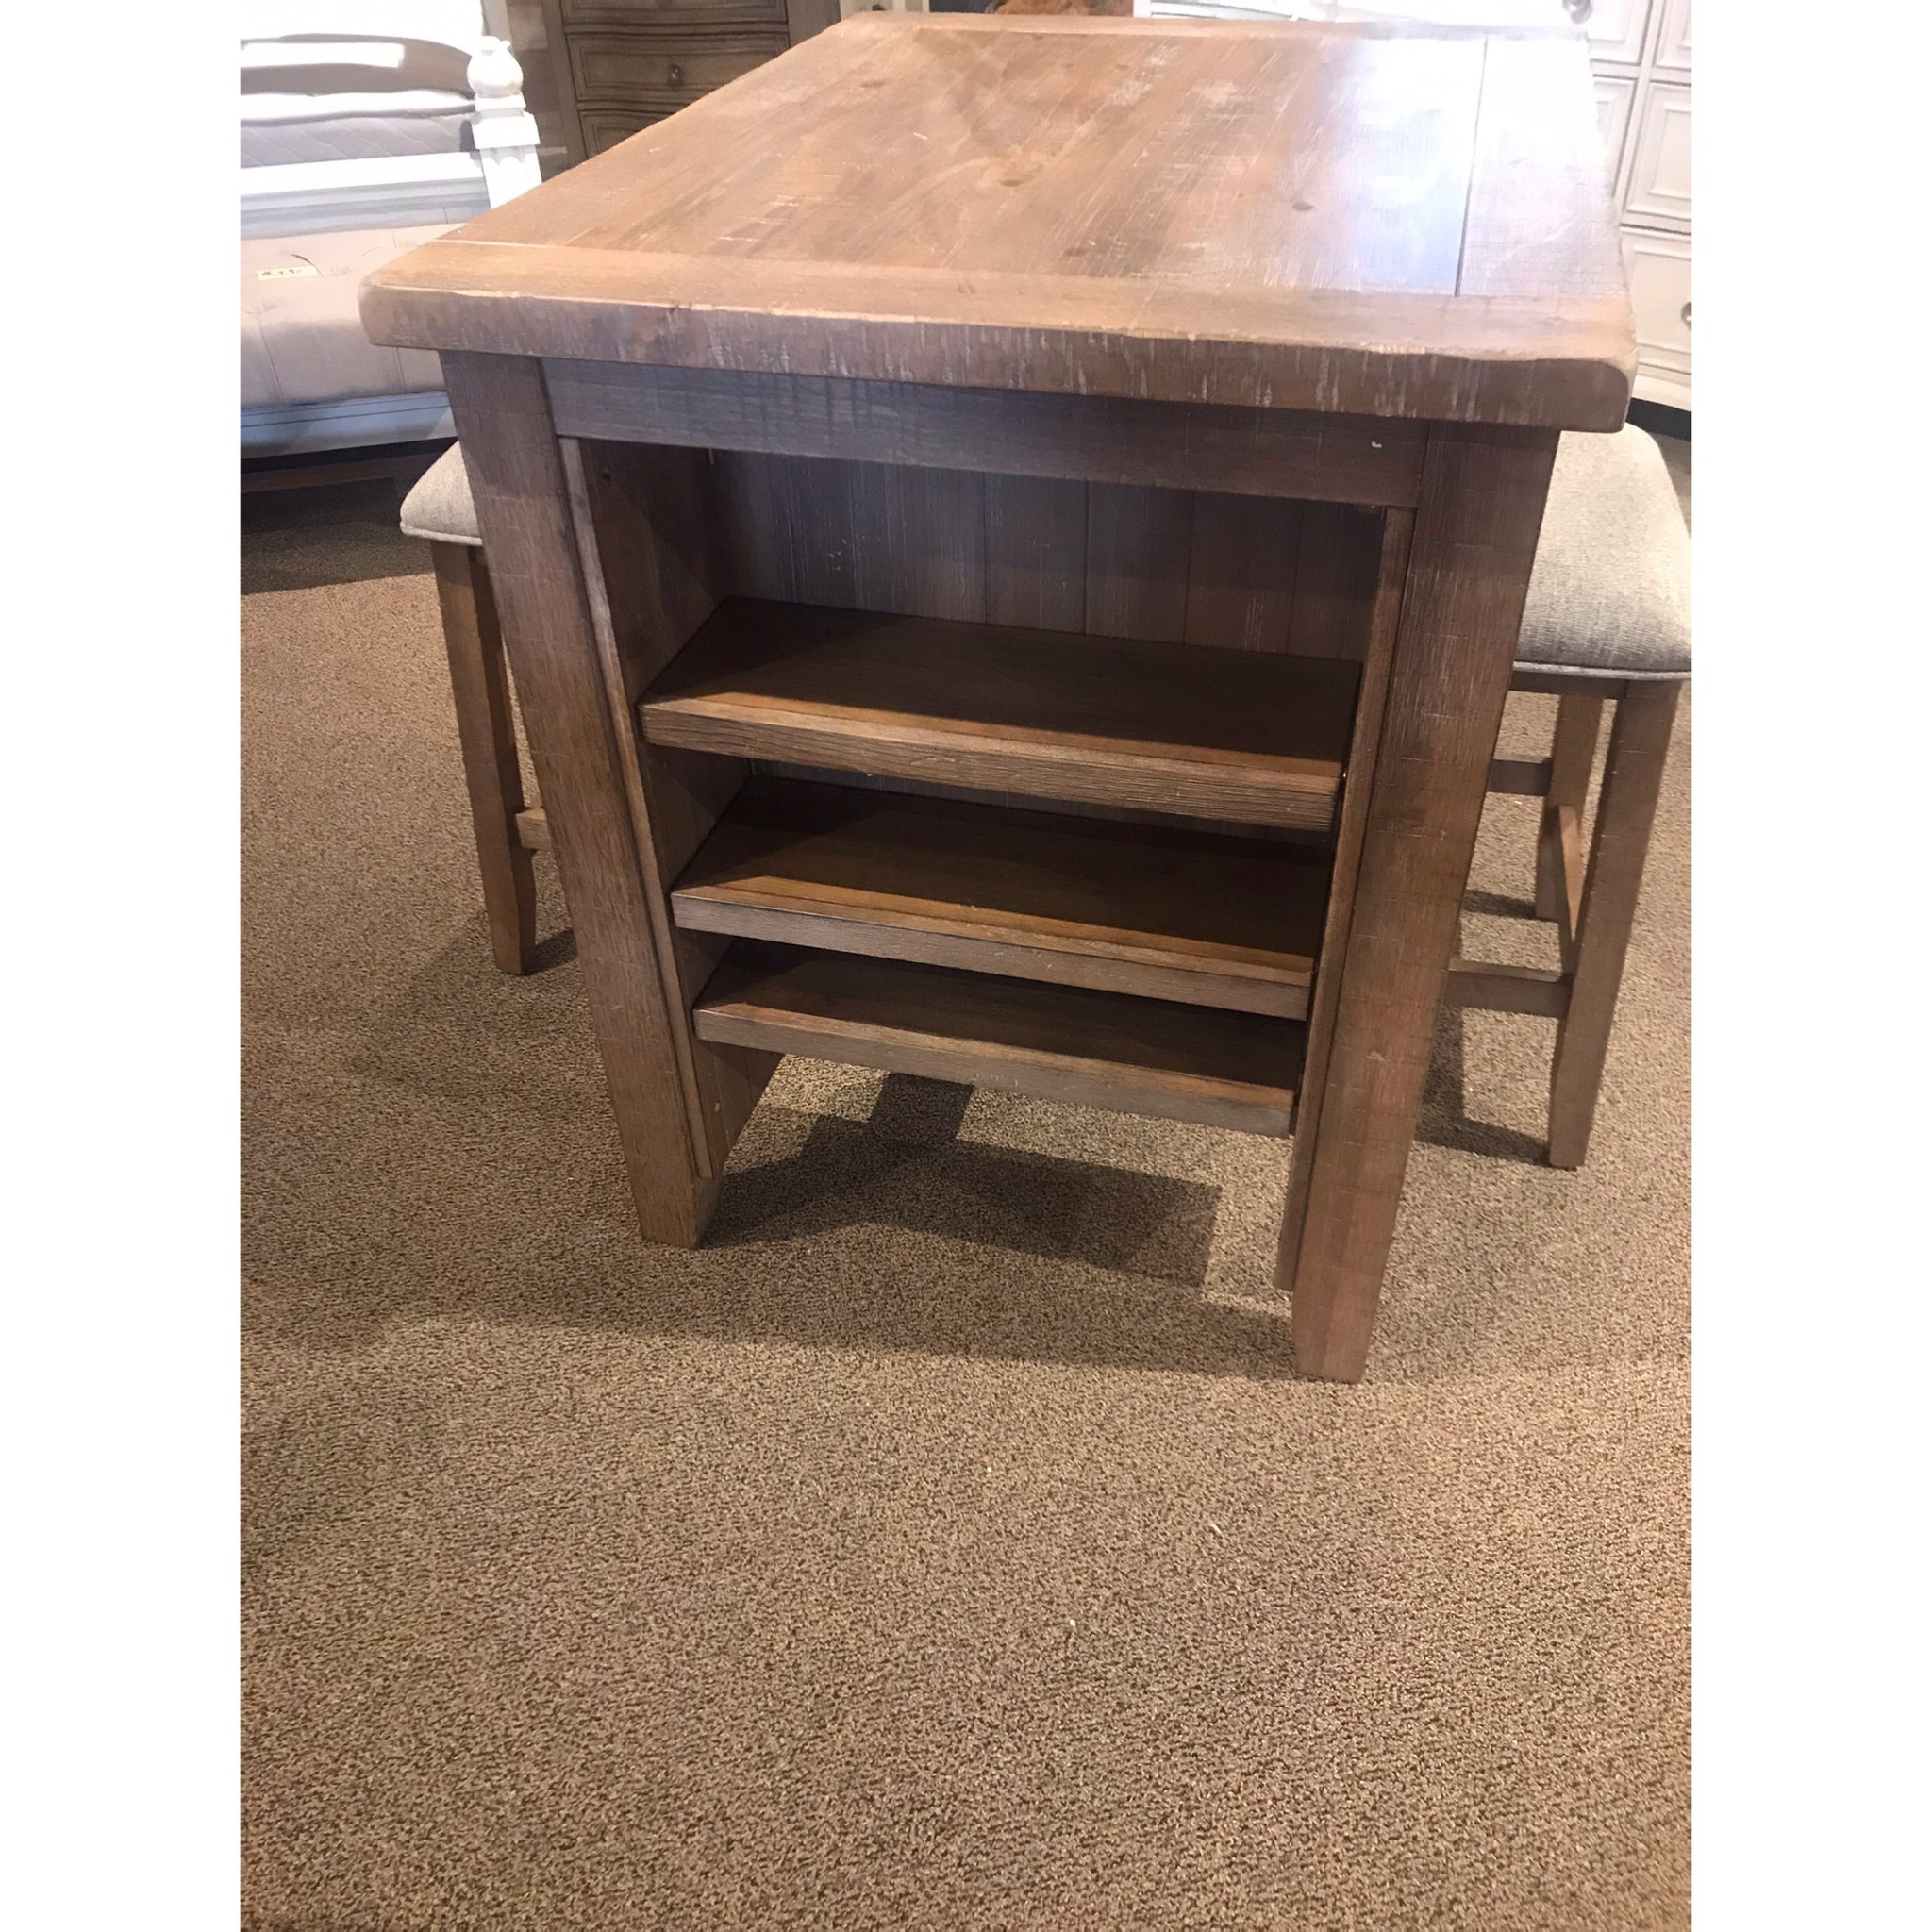 Highland Counter Height Desk/Dining Table